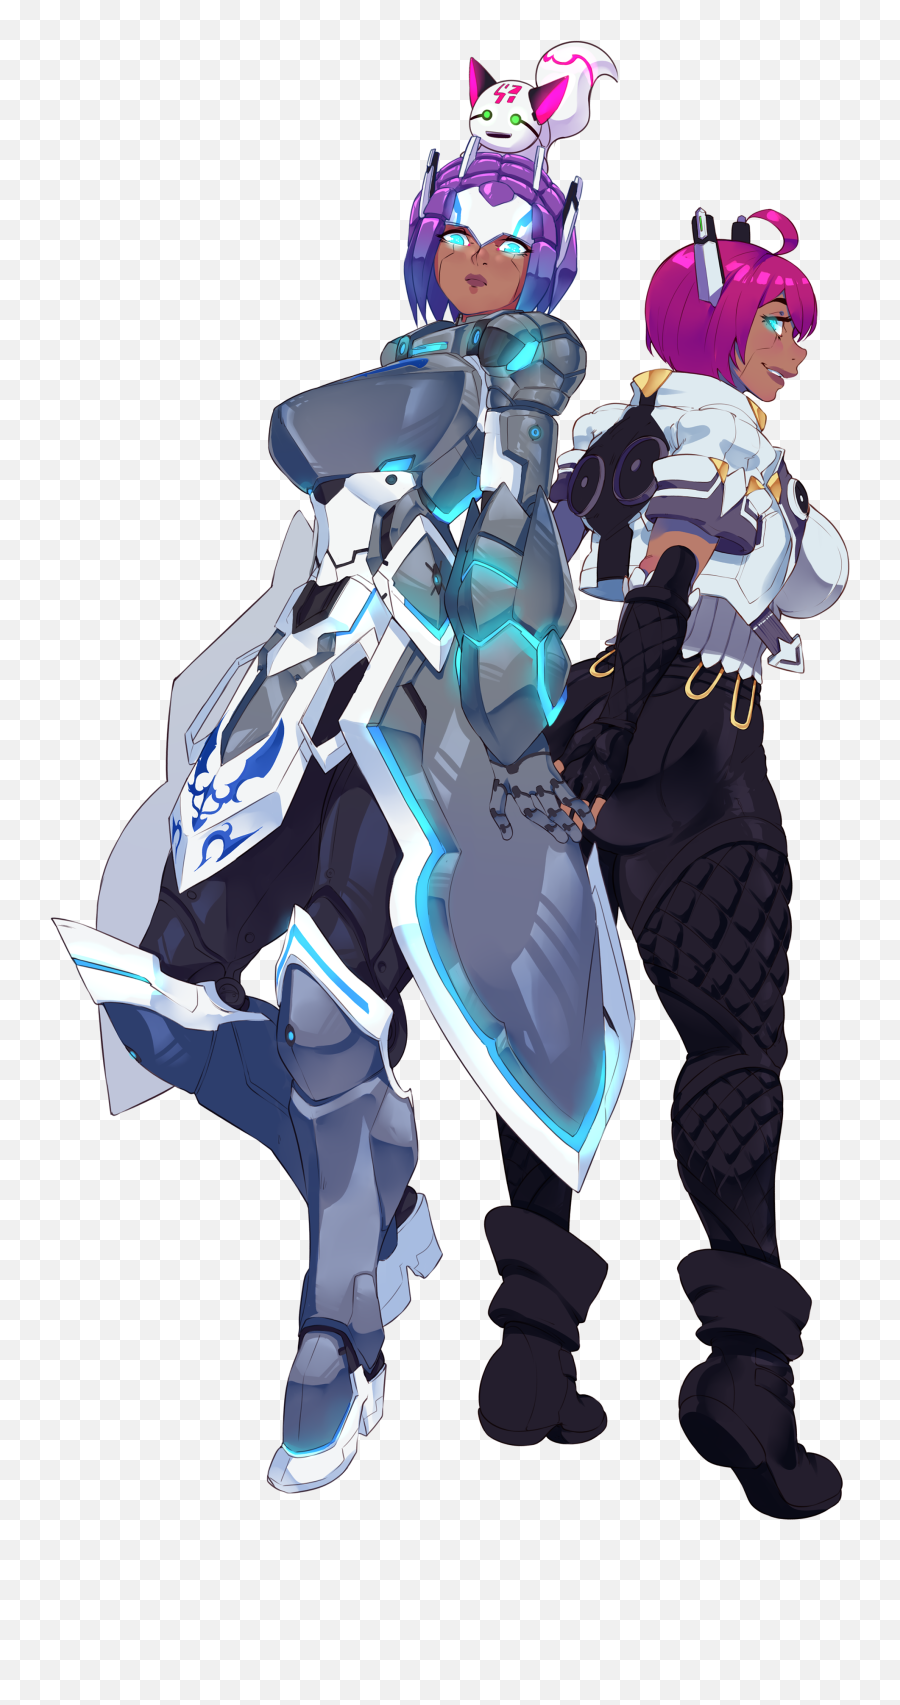 Artwork I Got Of My Cast In Her Armor - Pso2 Cast Art Png,Pso2 What Is The Sprout Icon